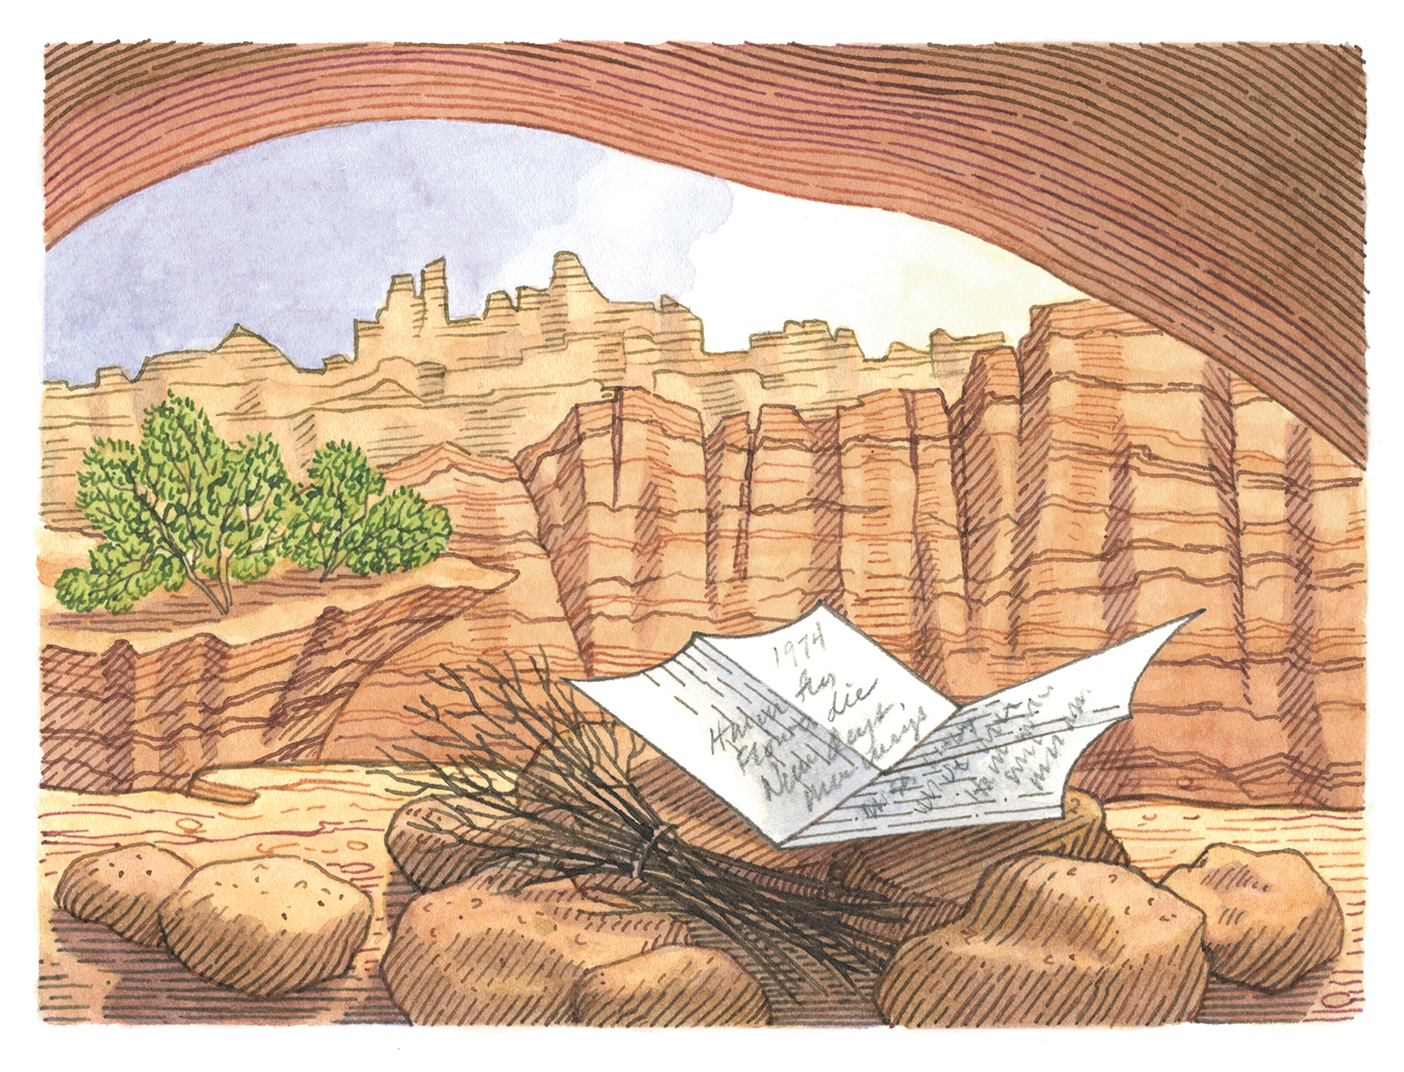 An illustration of a piece of paper on the floor of a cave in southern Utah.